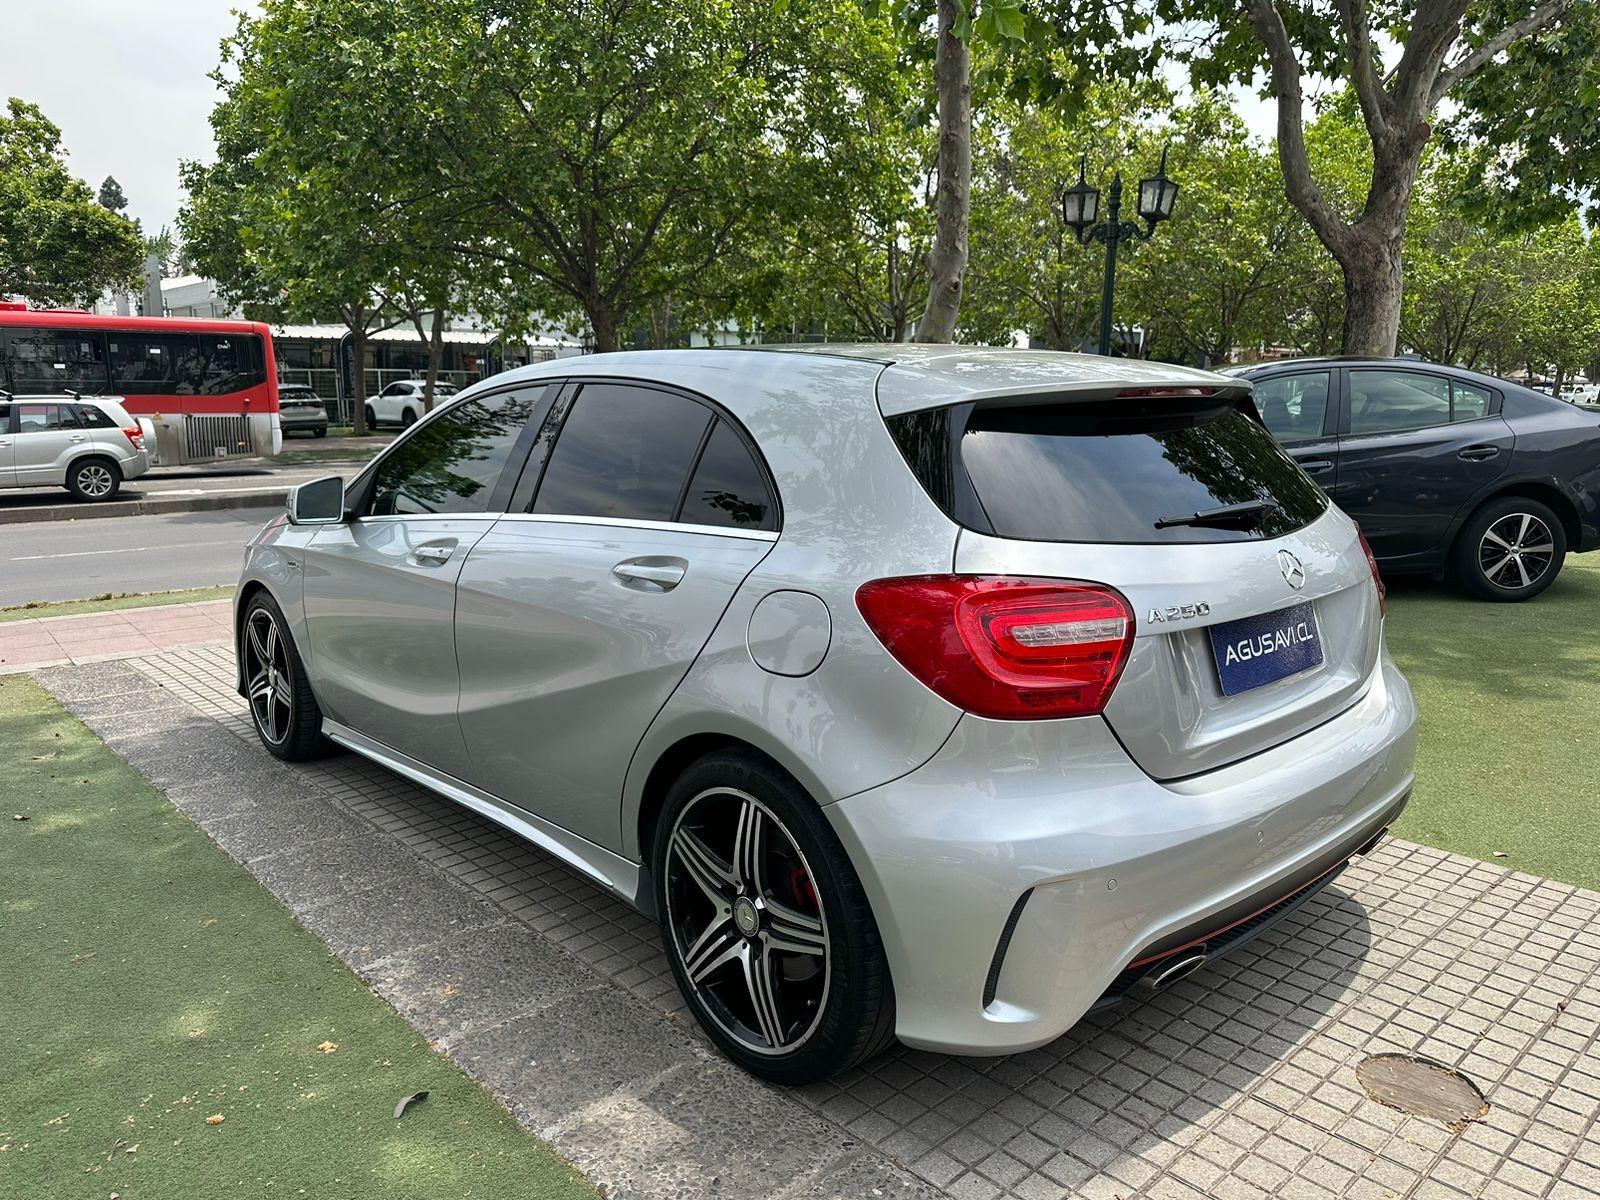 MERCEDES-BENZ A250 2.0 Sport DCT  2013 AUTOMATICO / SOLO 62.000 KM !! - FULL MOTOR